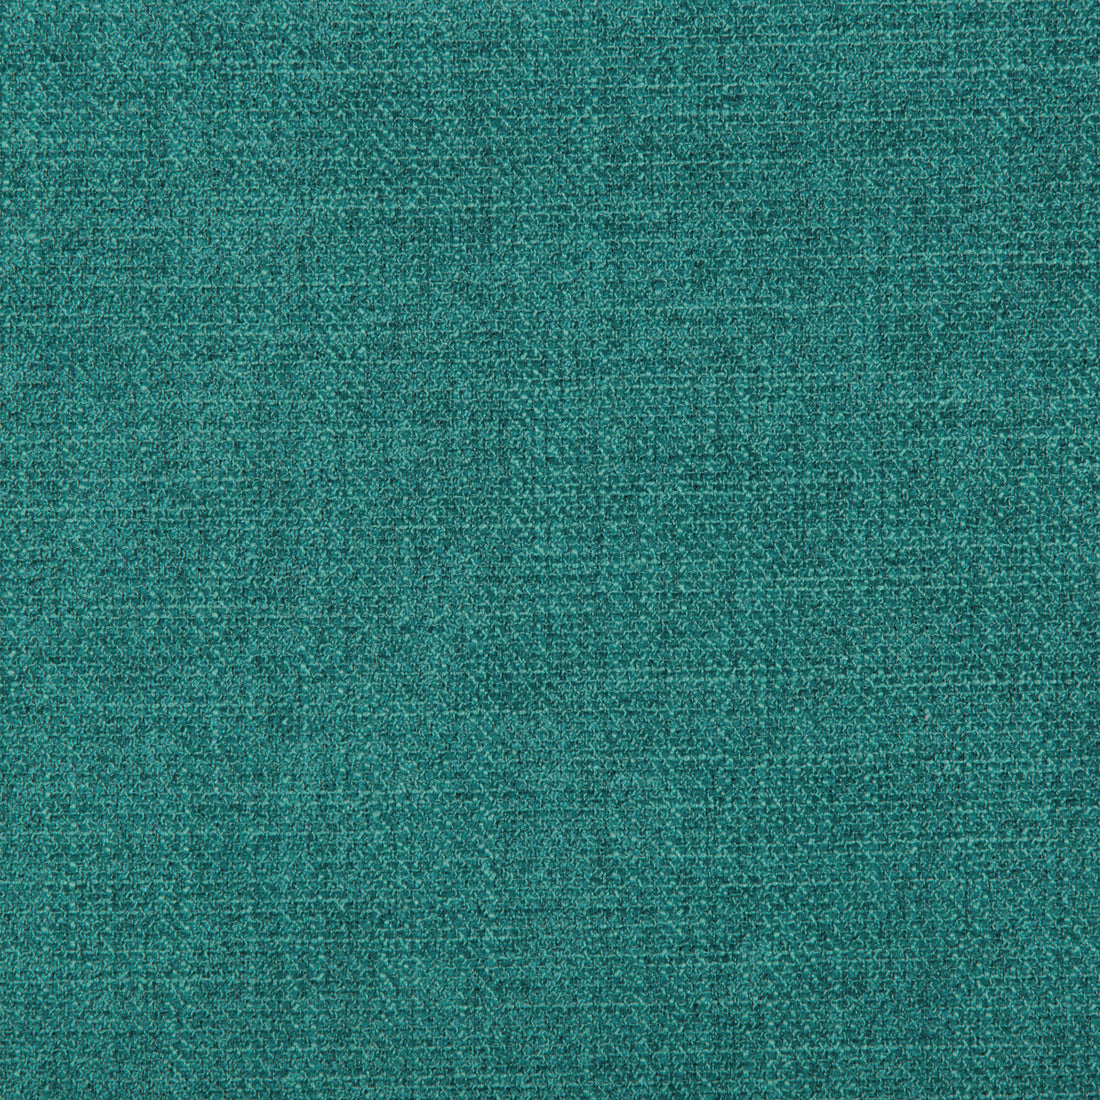 Kf Smt fabric - pattern 35390.35.0 - by Kravet Smart in the Performance Crypton Home collection